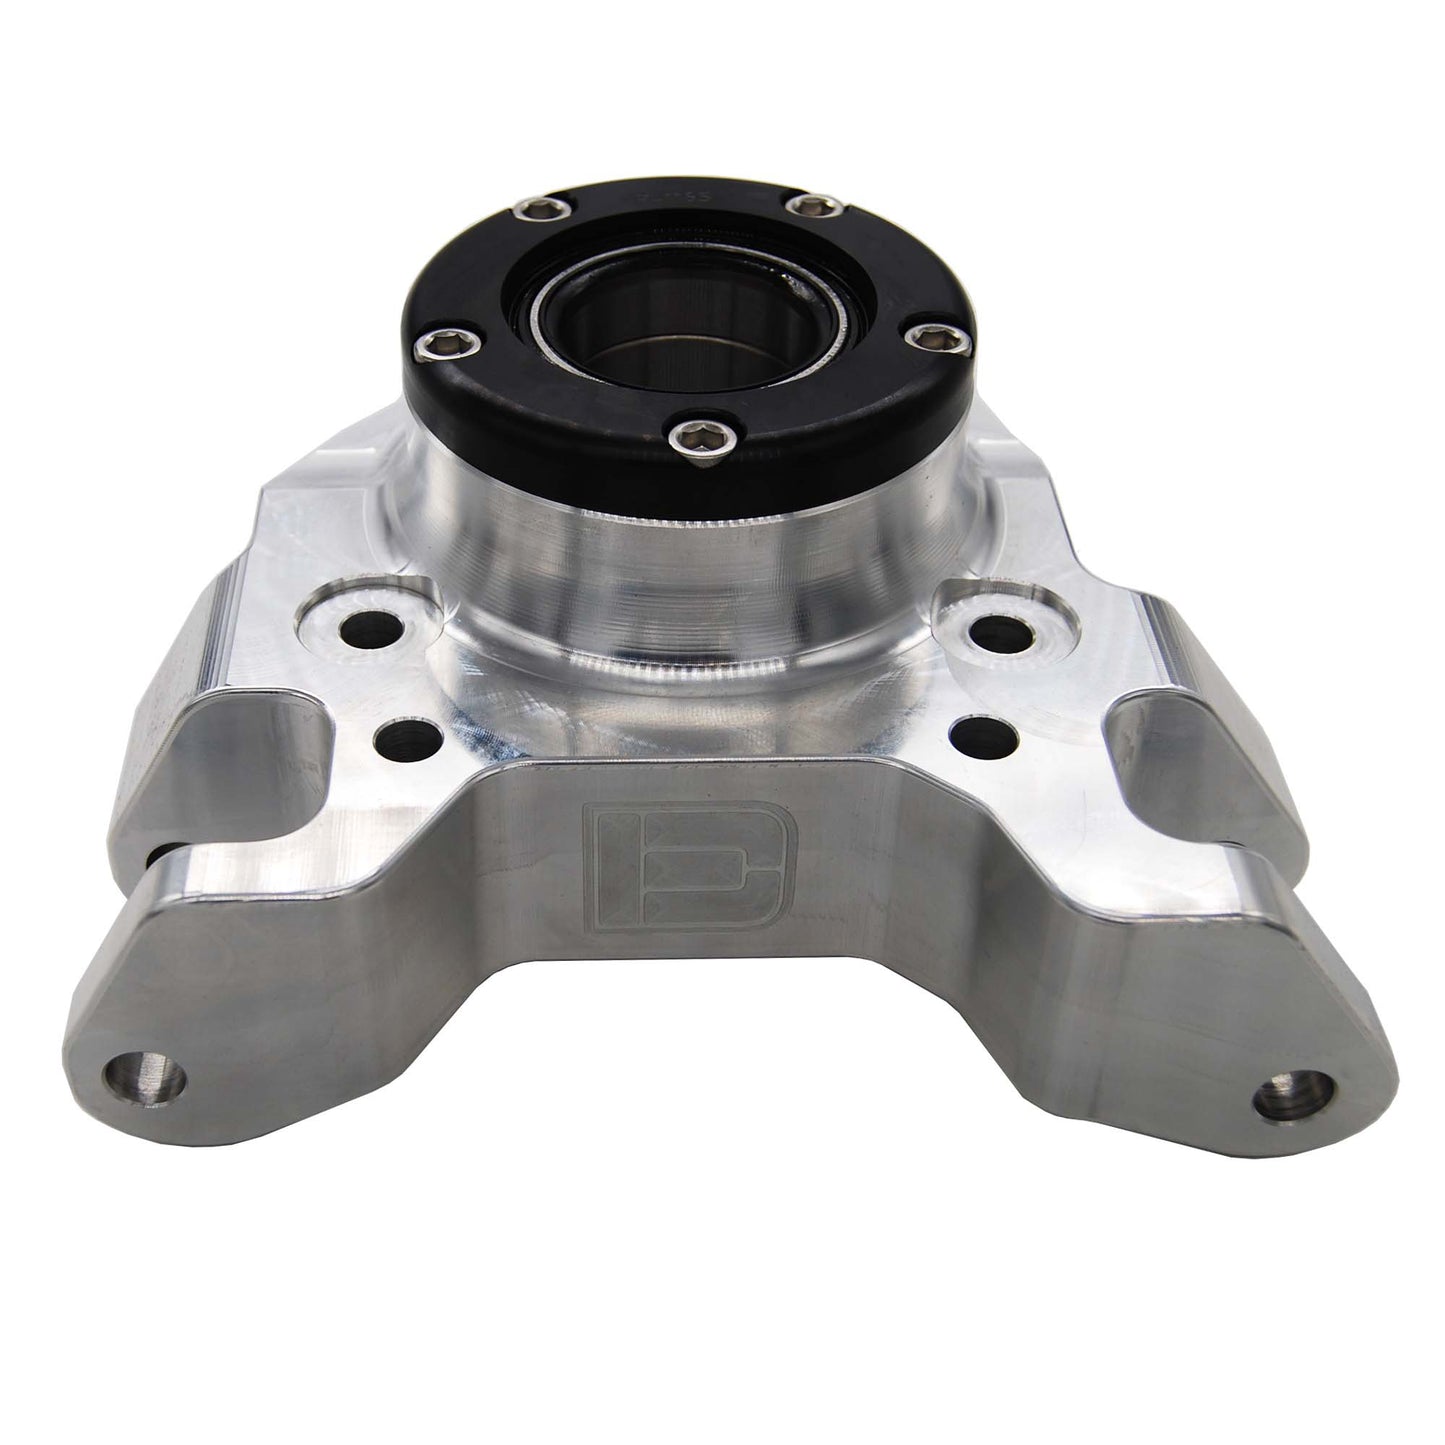 Capped RZR PRO XP Billet Rear Bearing Carrier/Spindle